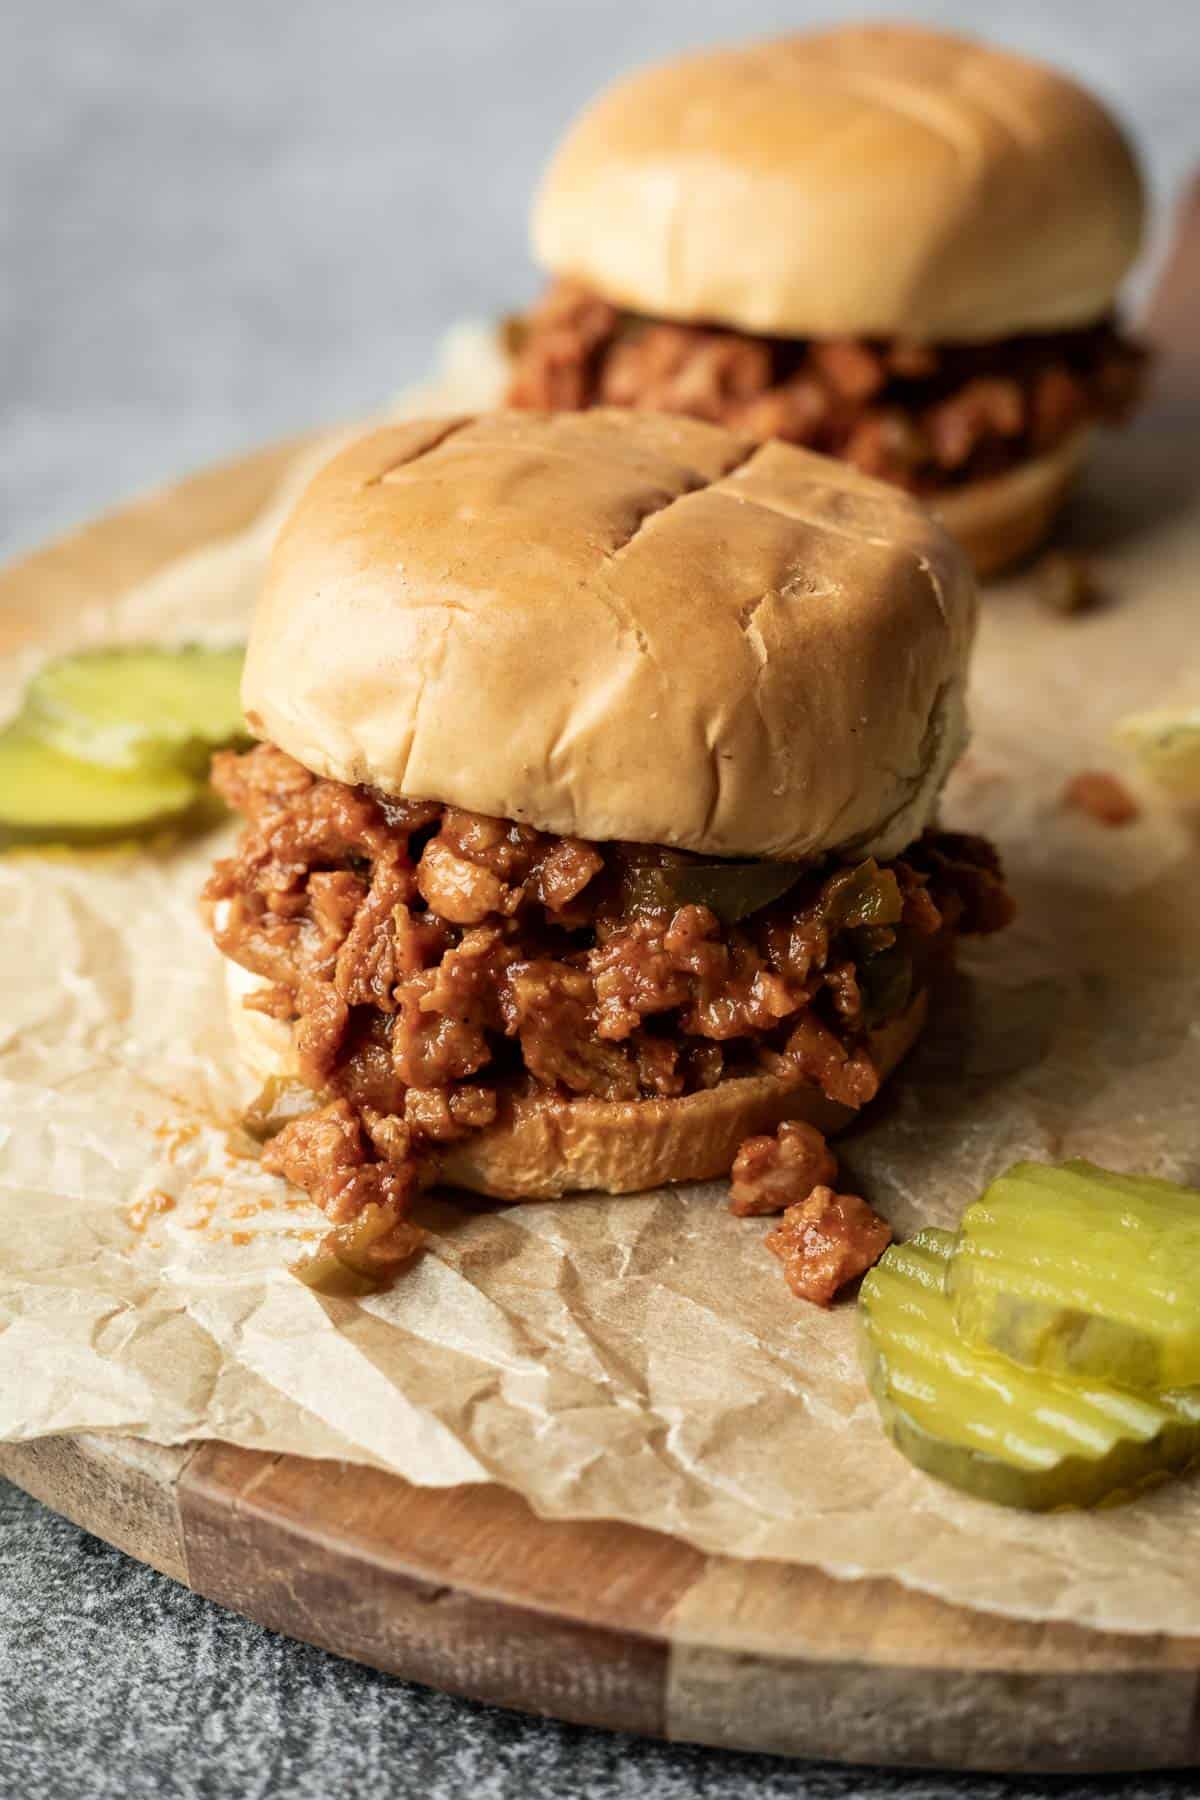 Saucy soy curl sloppy joes with pickles.